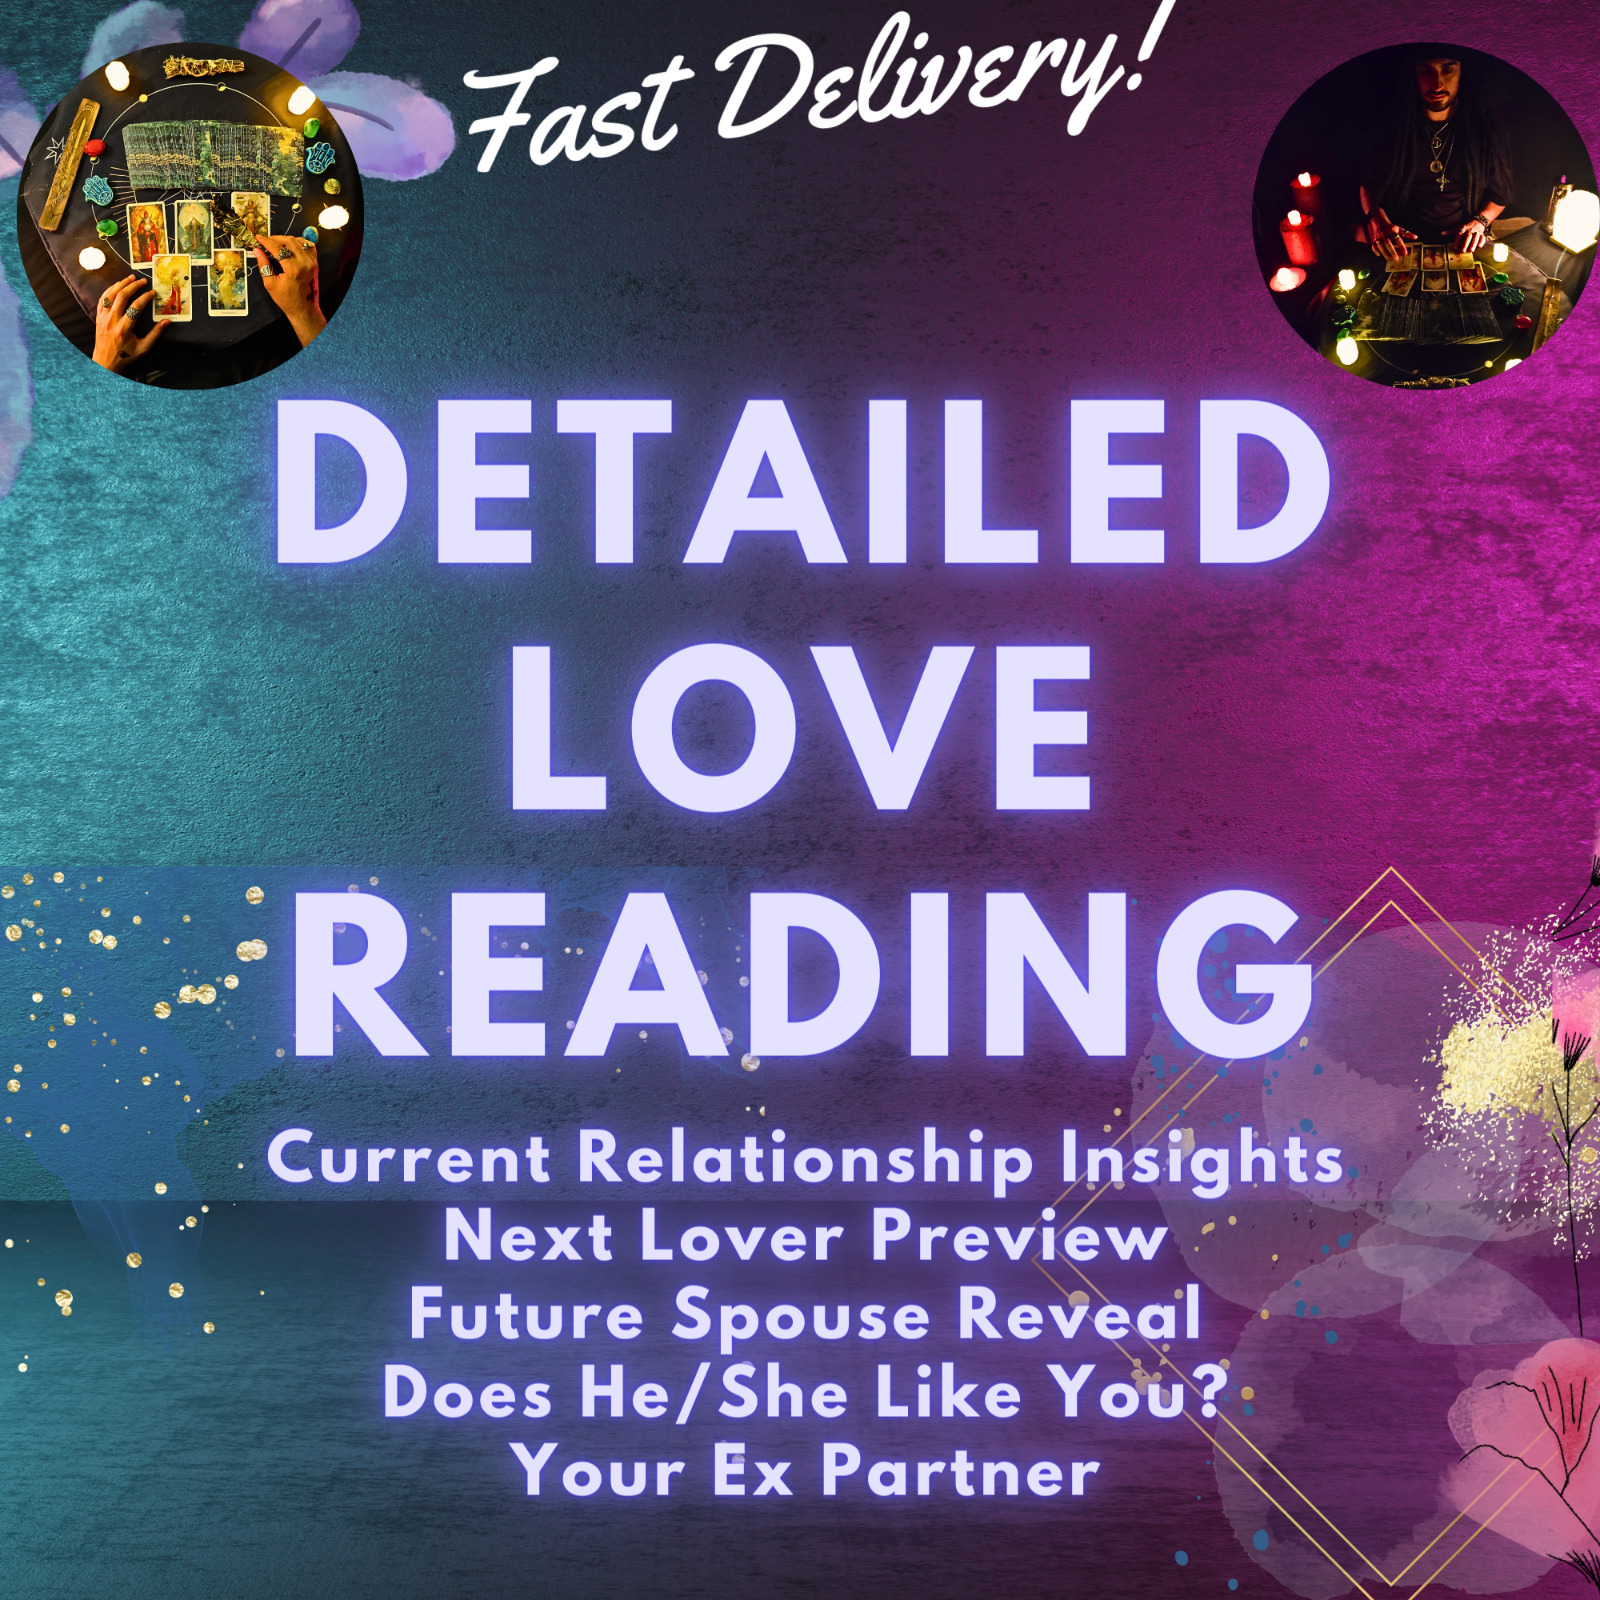 Detailed Love Psychic Tarot Reading Same Day, Relationship Soulmate Next or Ex